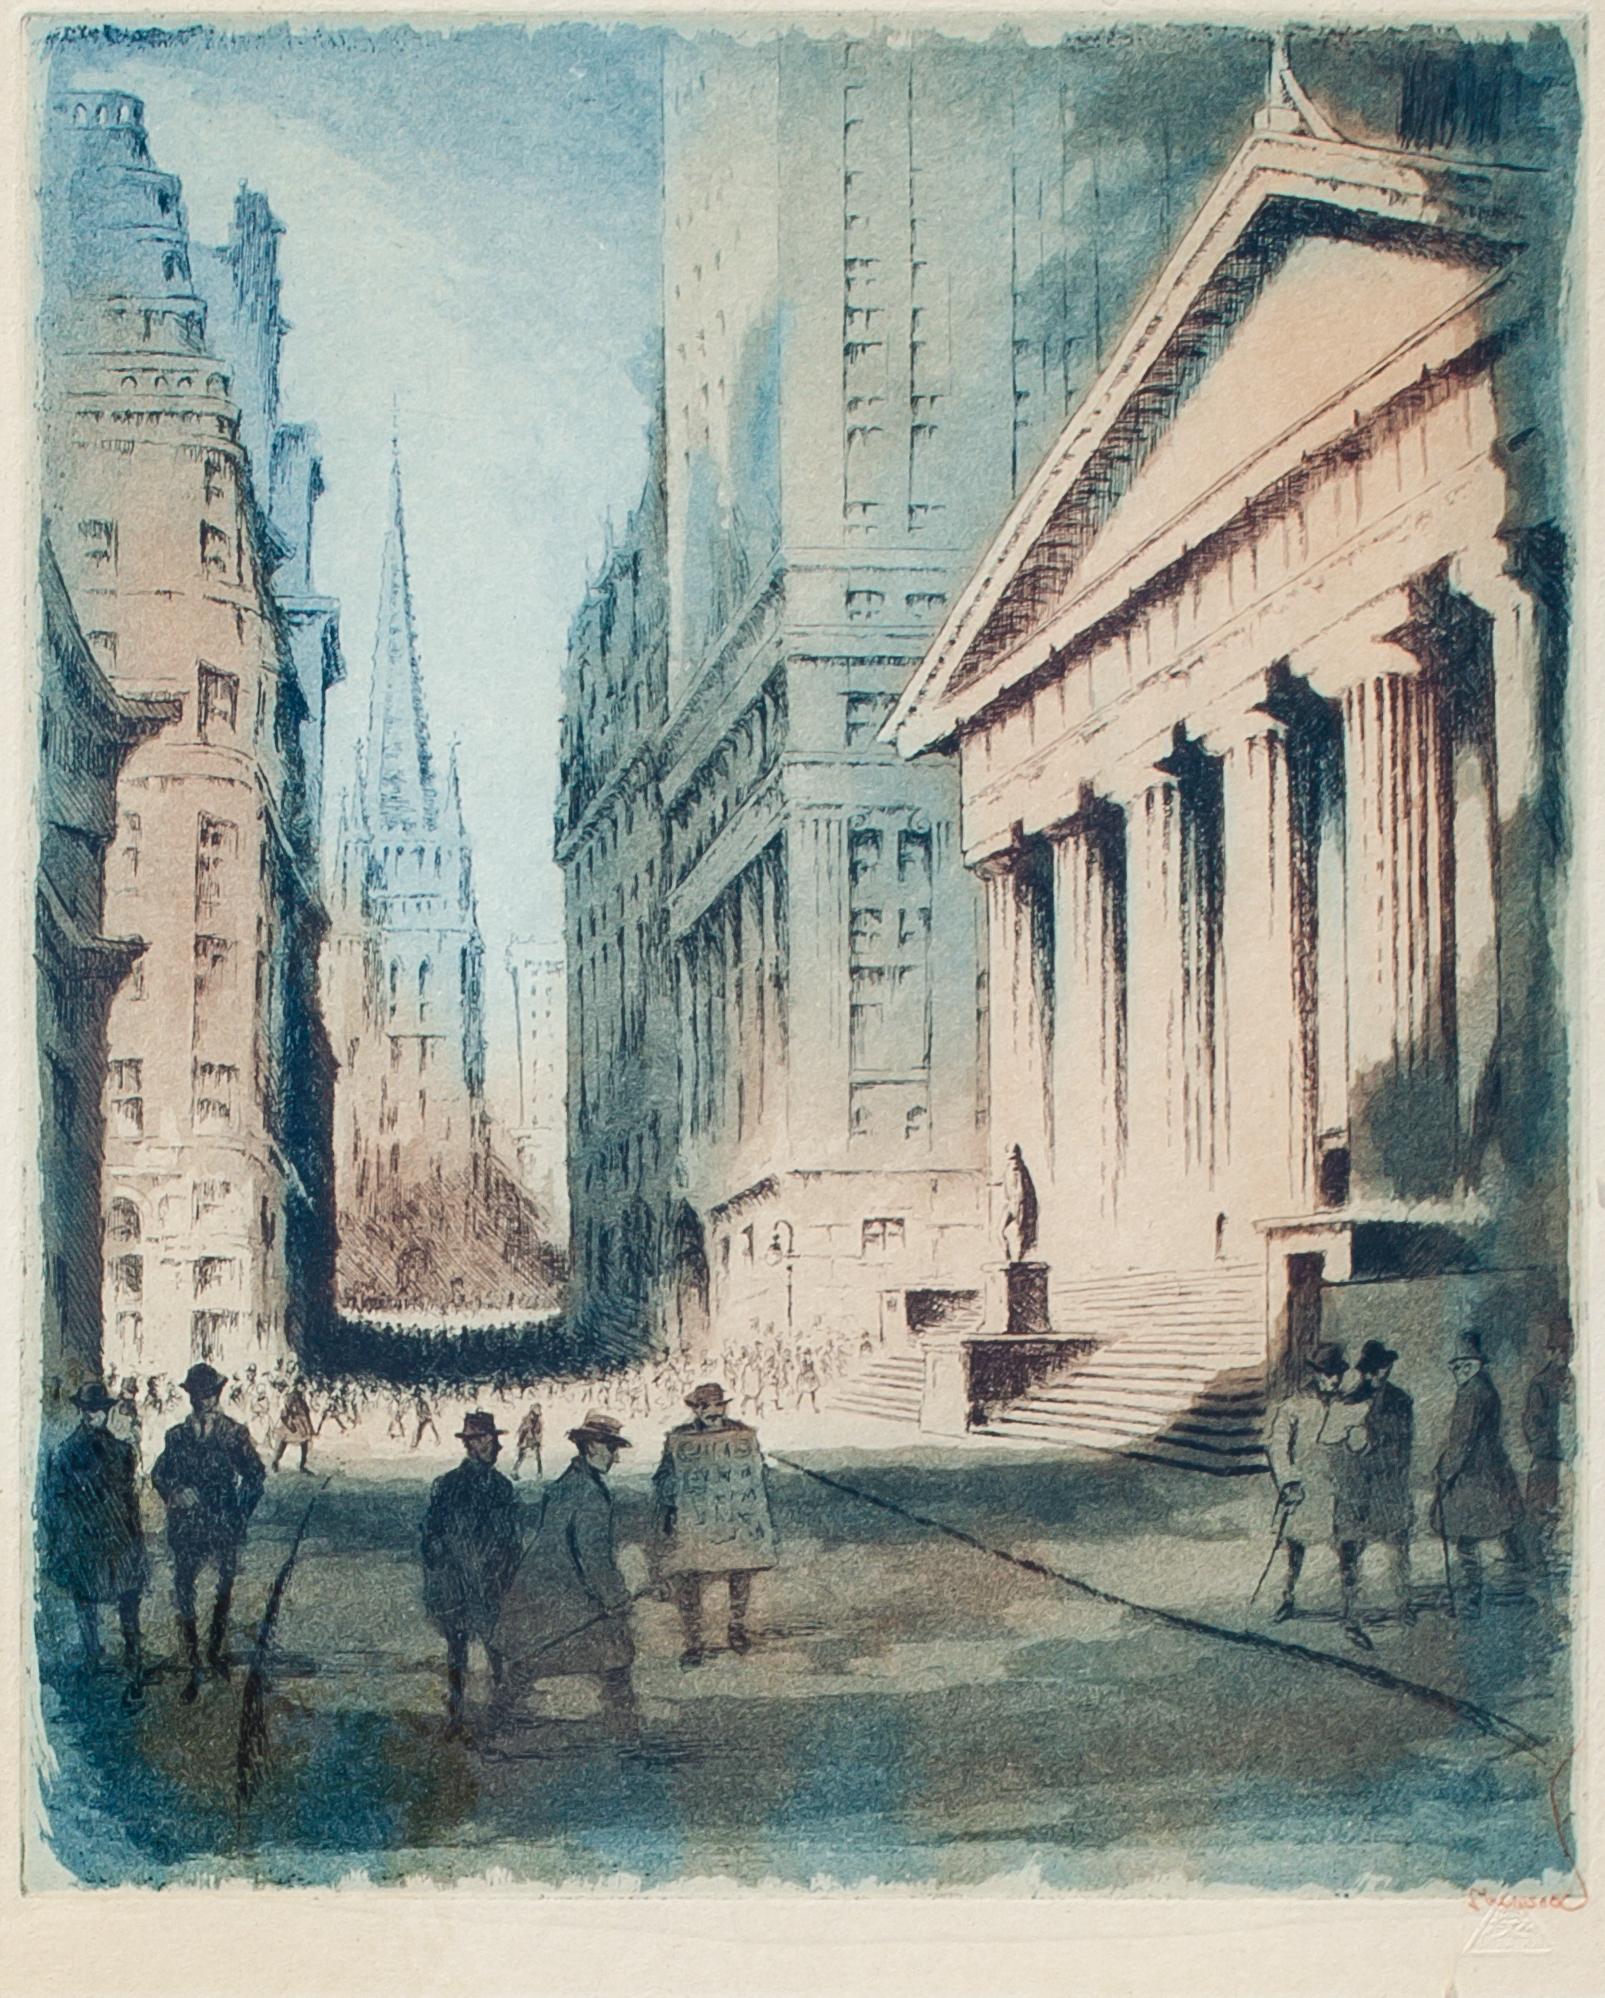 William Anderson Sherwood (American, 1875-1951)
New York Stock Exchange, Early 20th century
Etching and aquatint
Sight: 16 1/4 x 13 in.
Framed: 23 1/2 x 21 1/2 x 1 in.
Artist monogram in plate lower right
Signed 'Sherwood' lower right

This